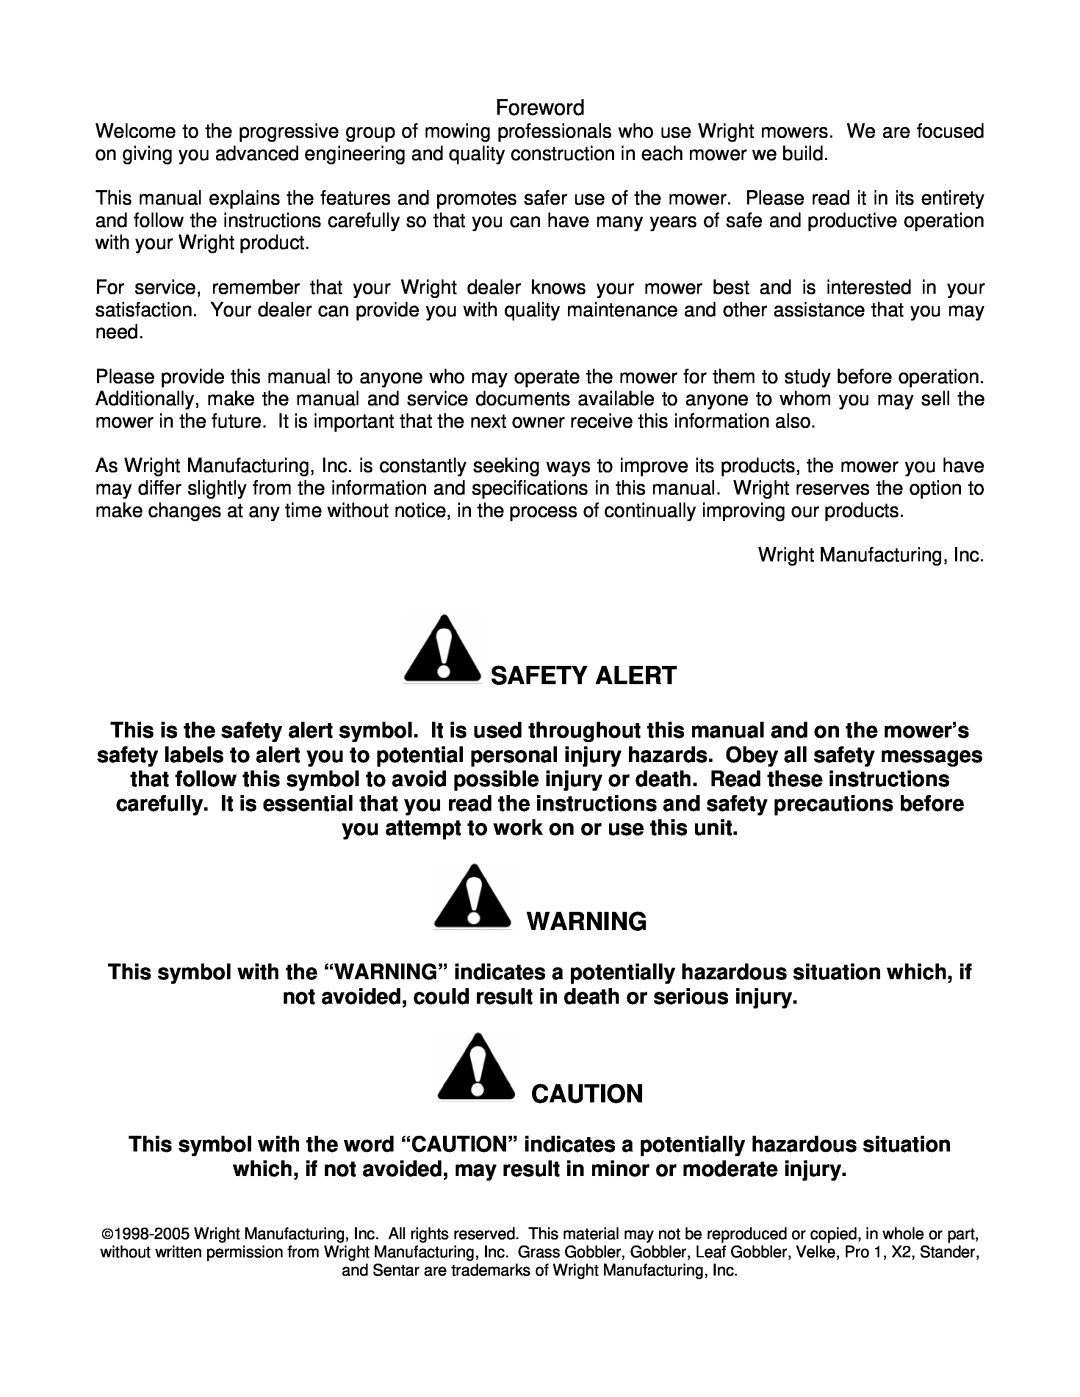 Wright Manufacturing 31897 owner manual Safety Alert, Foreword 